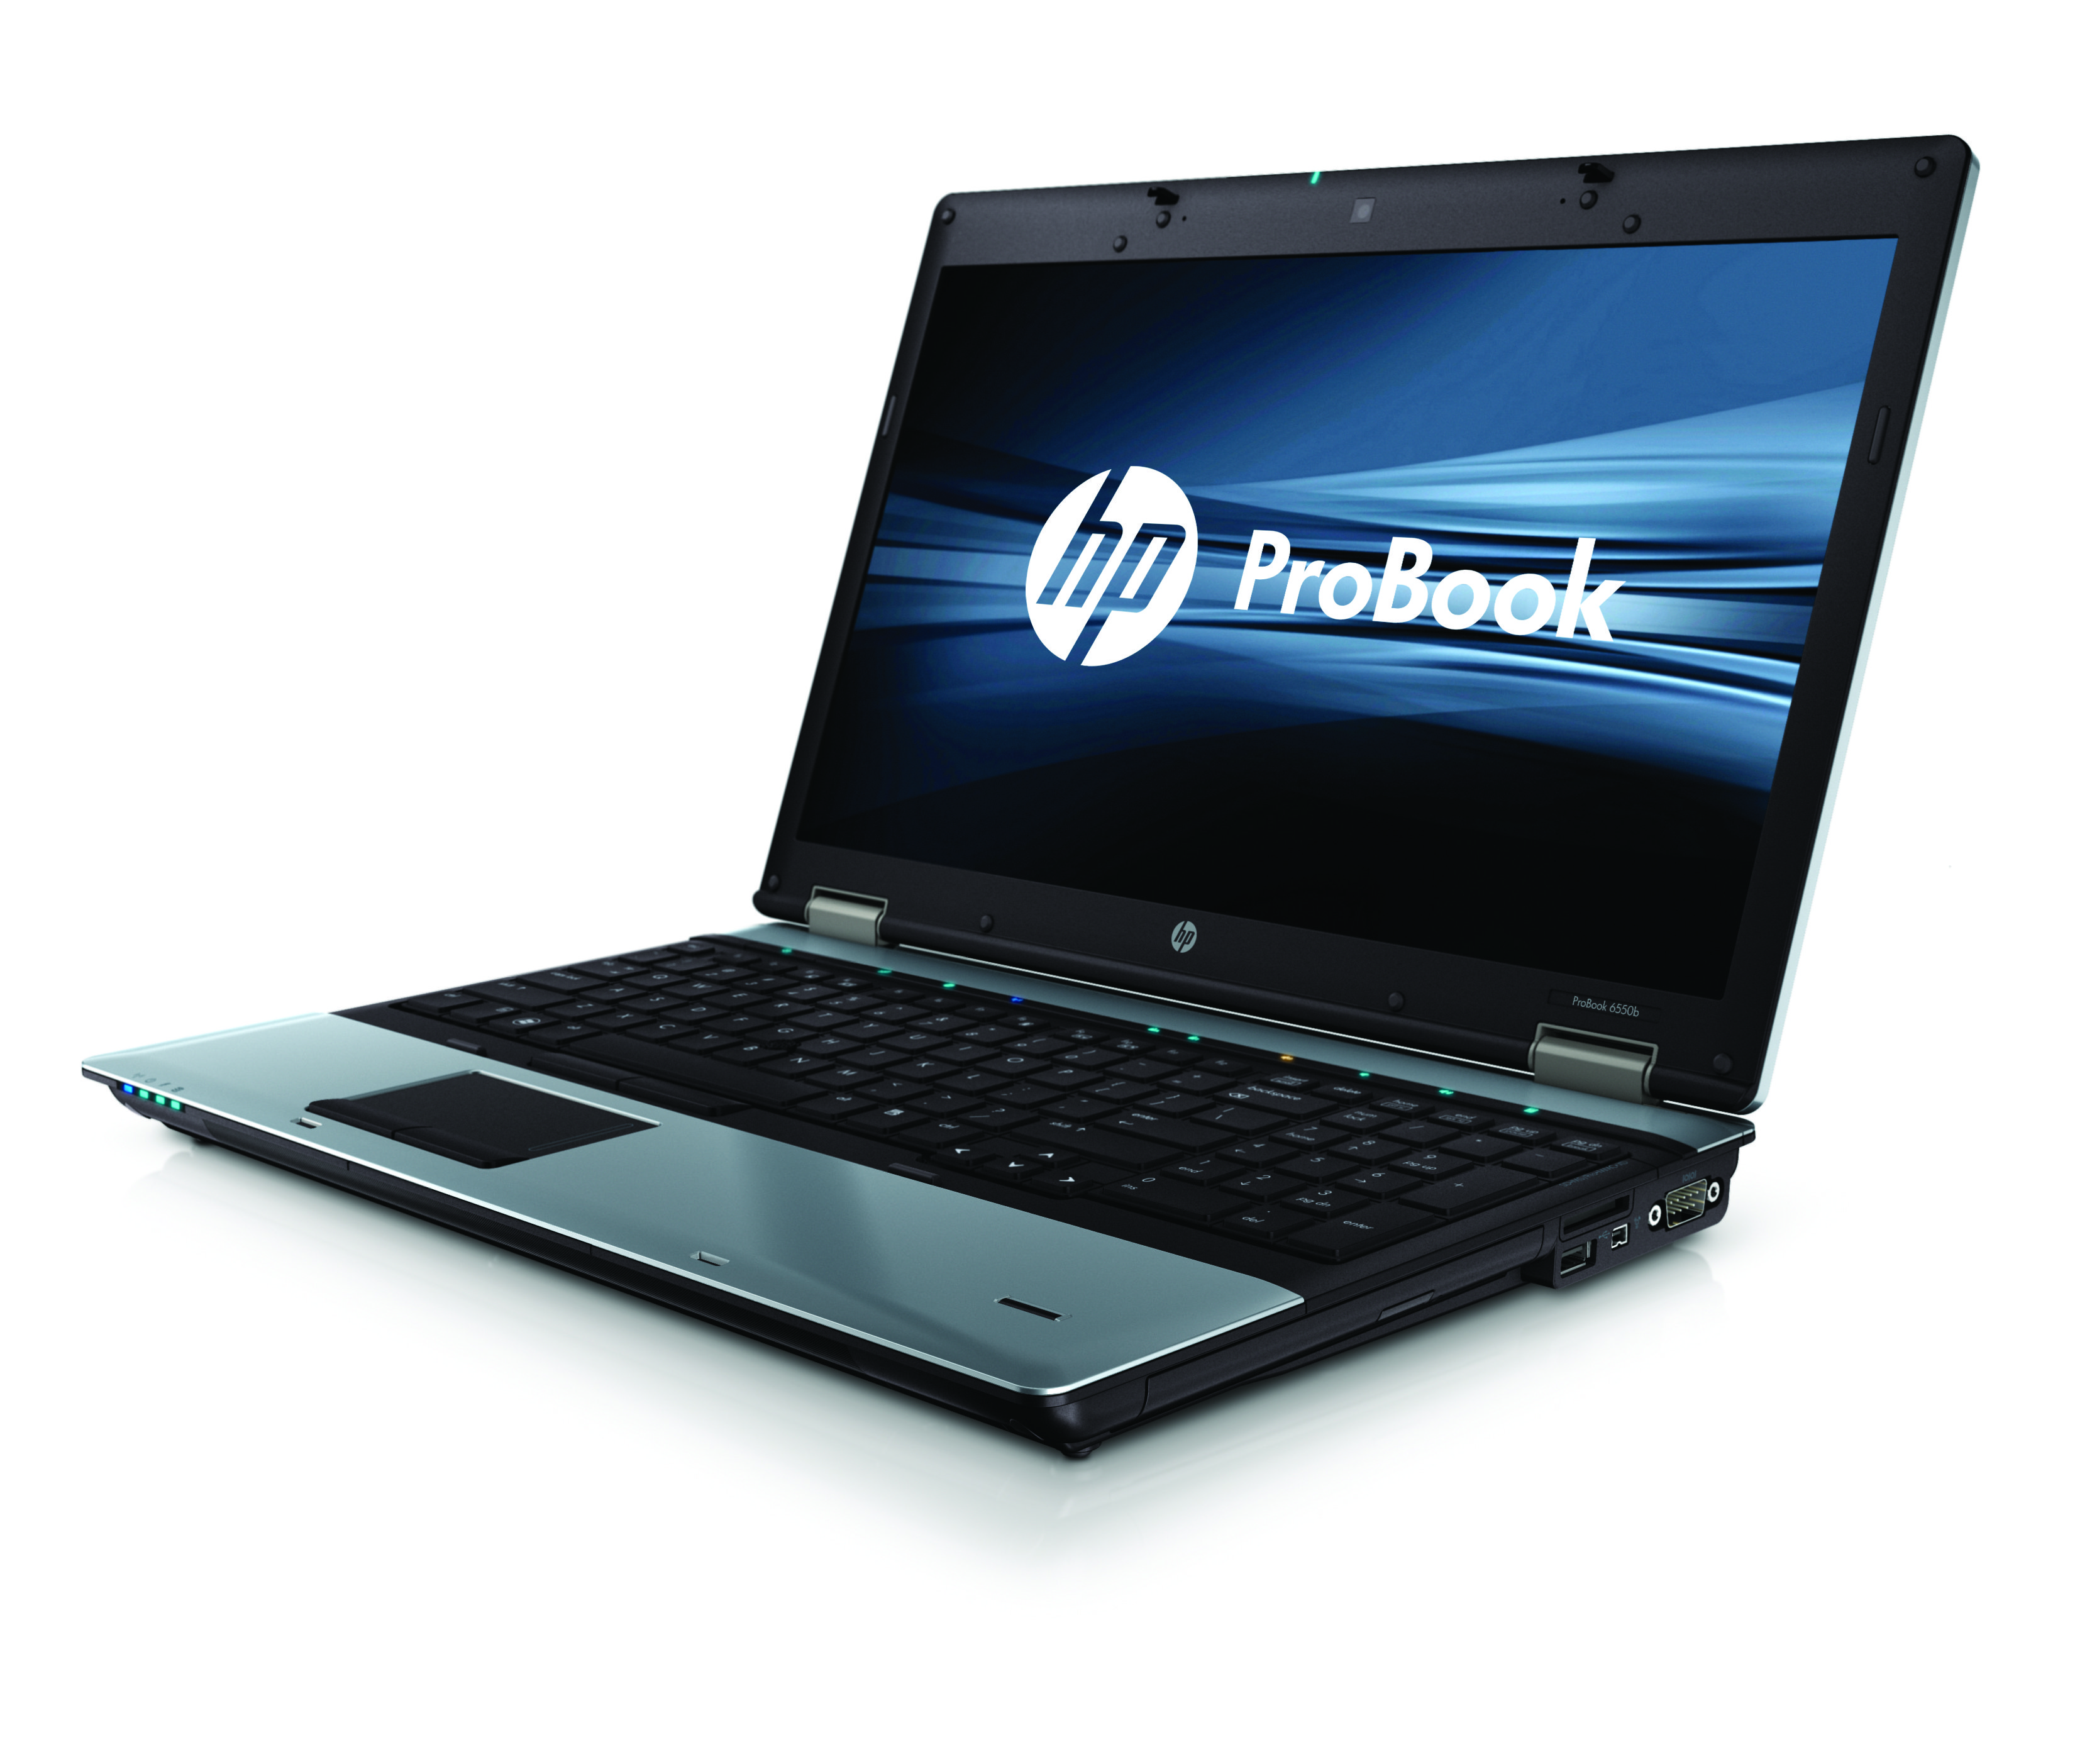 HP ProBook 6550b - ComputerService webshop - Specialized in used and ...